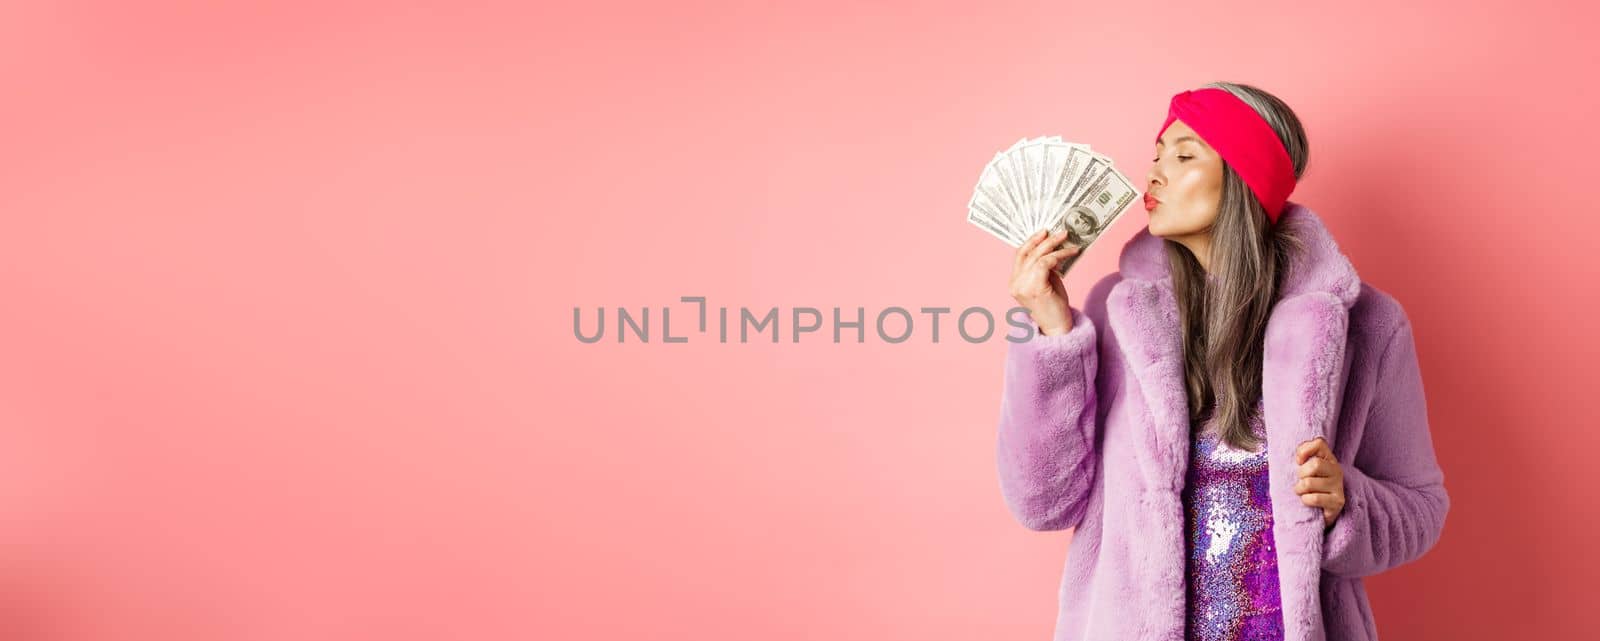 Shopping and fashion concept. Fashionable and rich senior woman kissing dollars money, looking pleased, wearing purple faux fur coat with party dress, pink background.